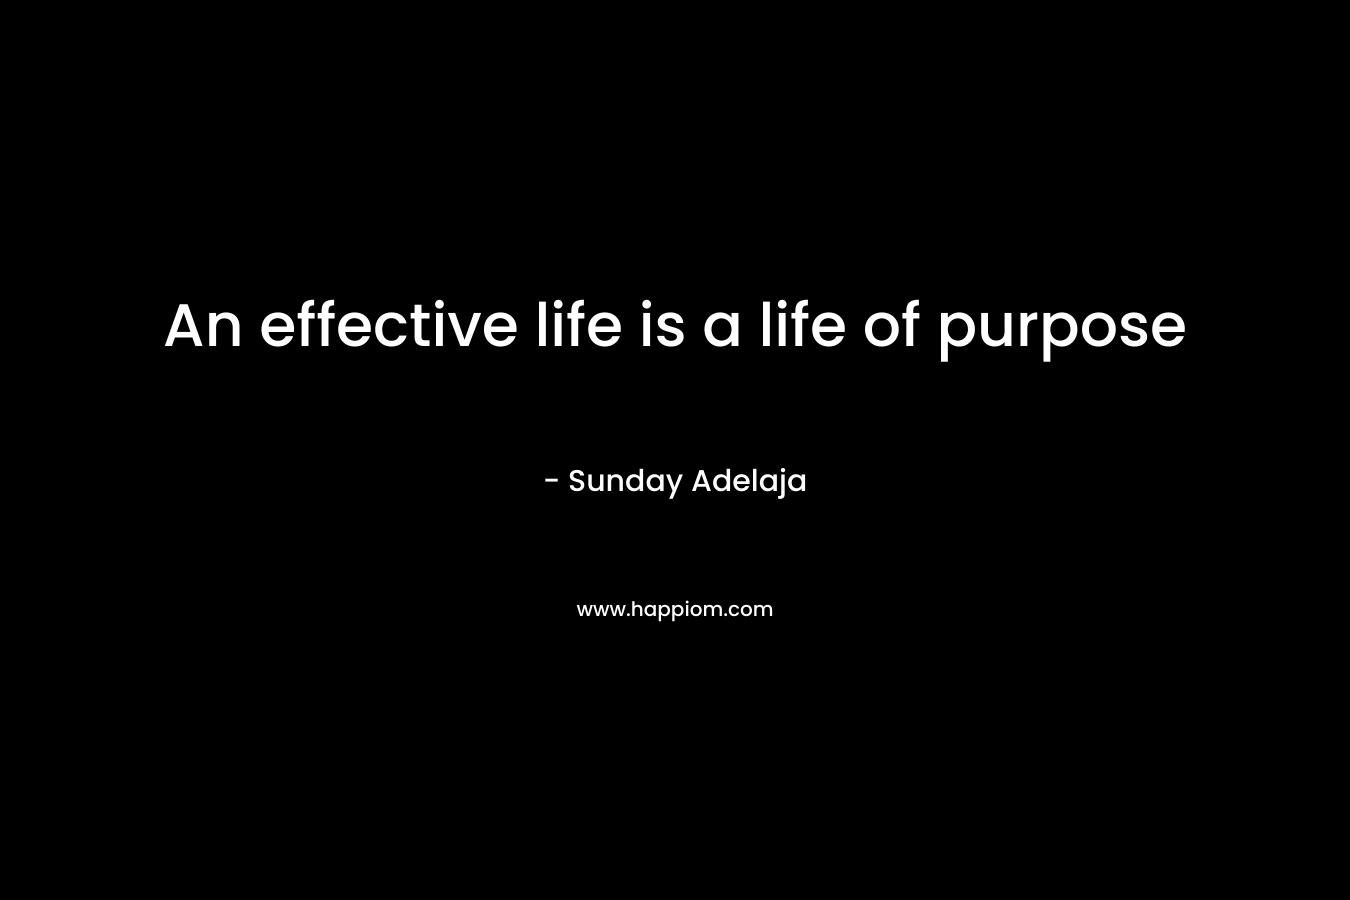 An effective life is a life of purpose